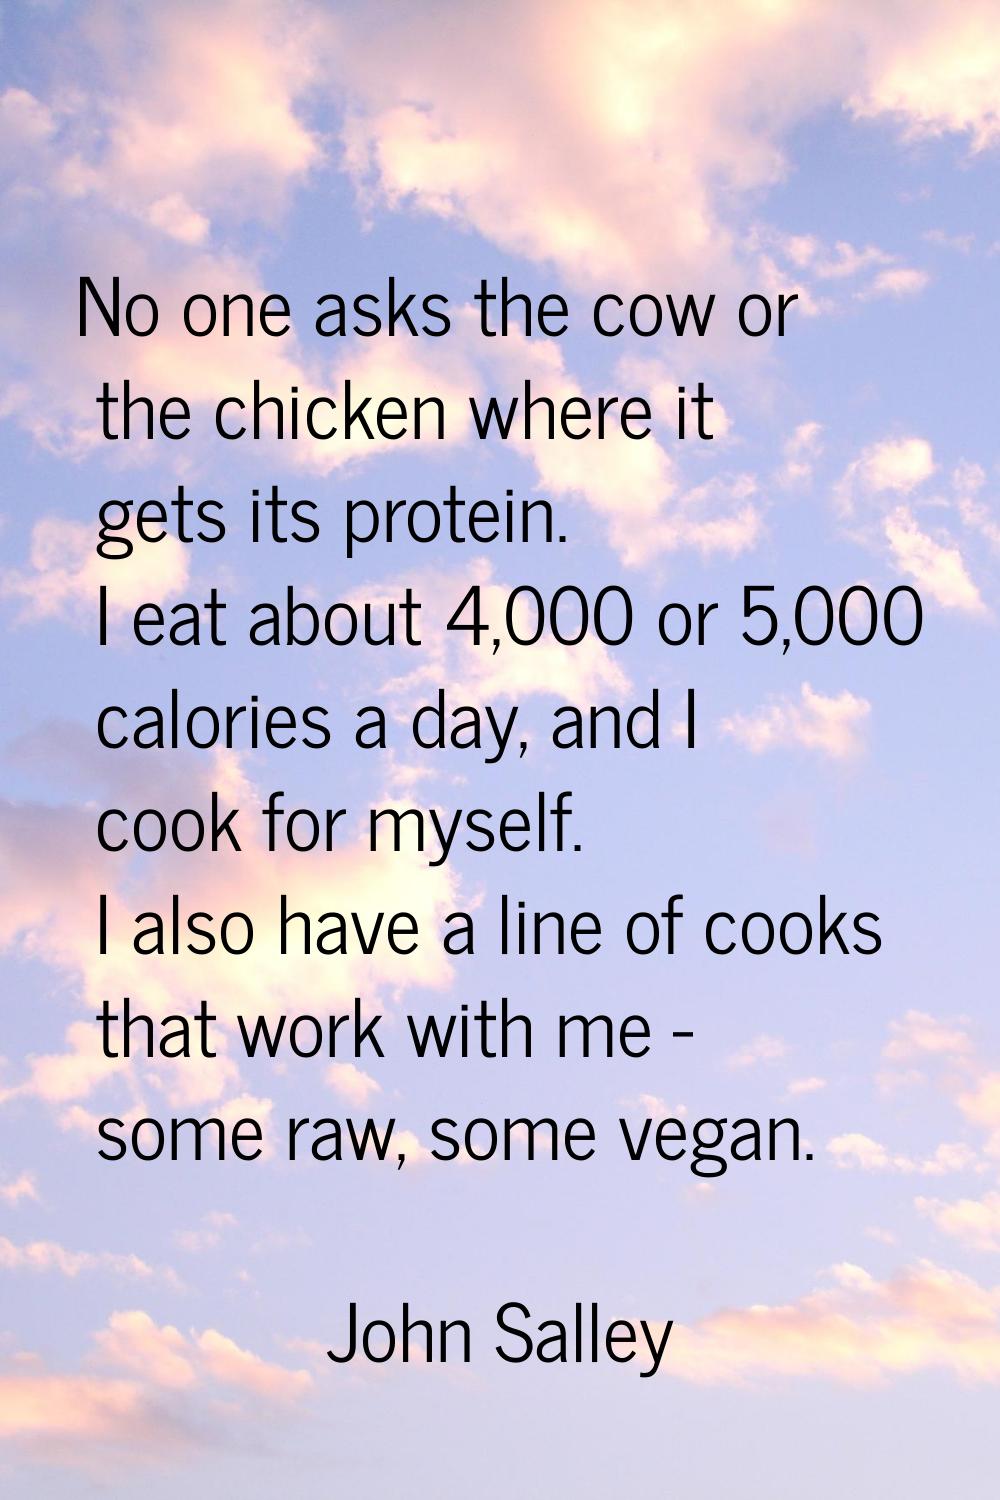 No one asks the cow or the chicken where it gets its protein. I eat about 4,000 or 5,000 calories a